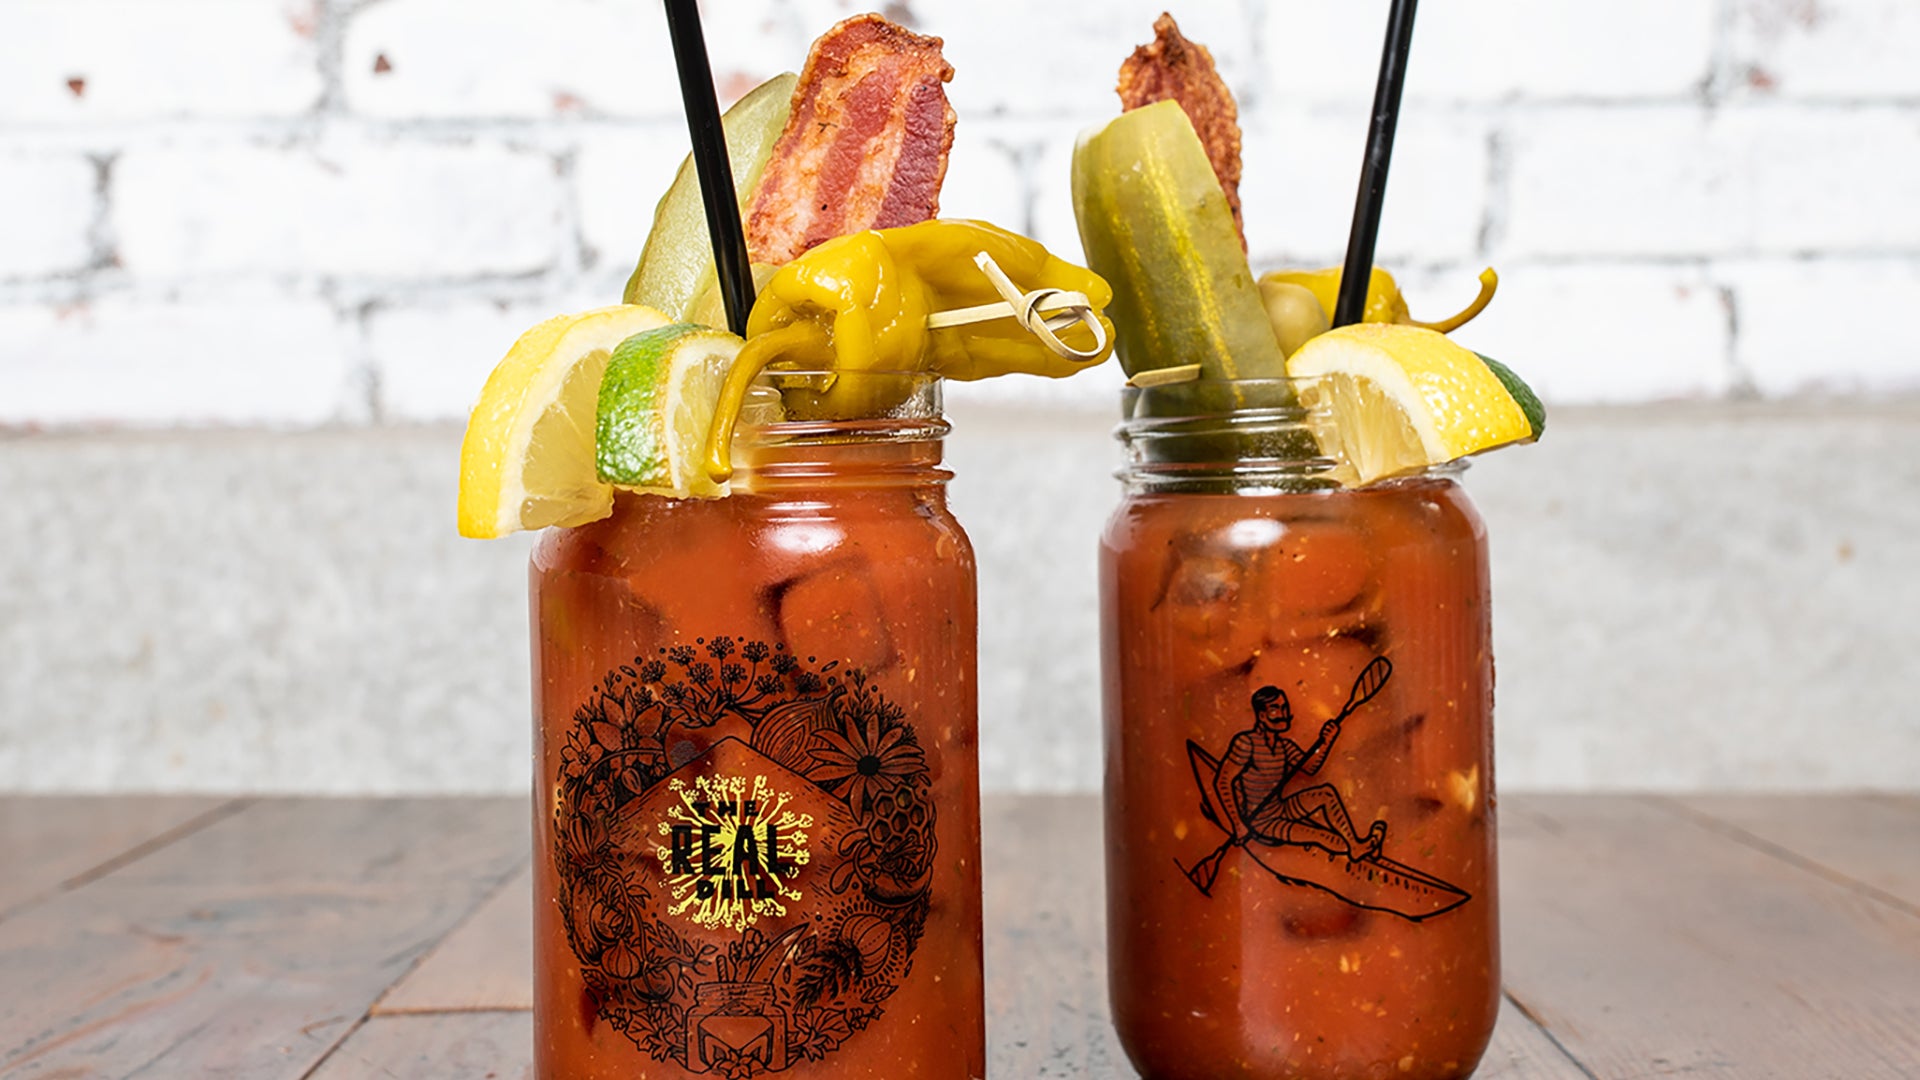 Health-Conscious Sipping: 3 Reasons Why a Bloody Mary Beats the Average Cocktail